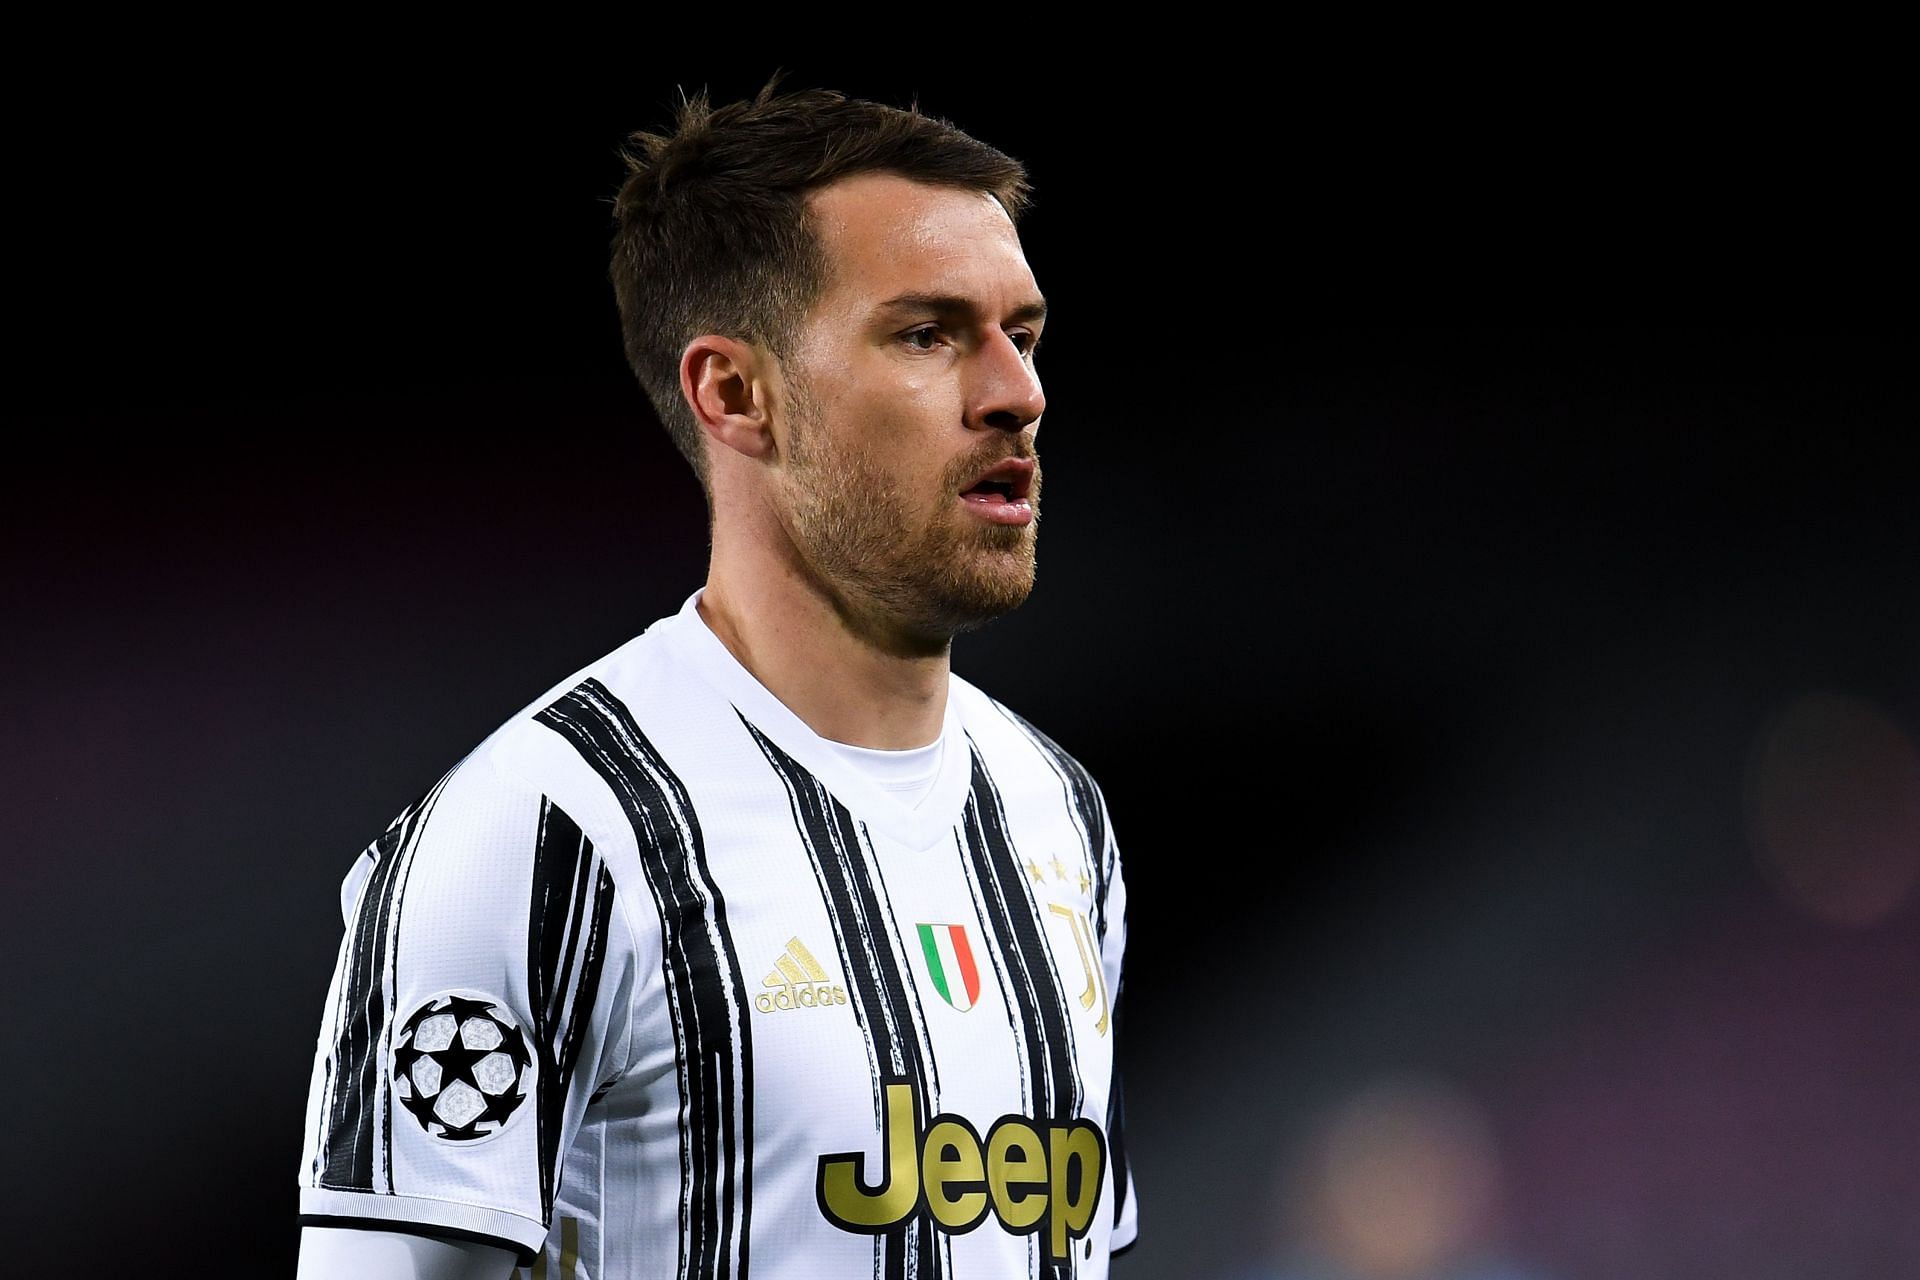 The midfielder is no longer a Juventus player.